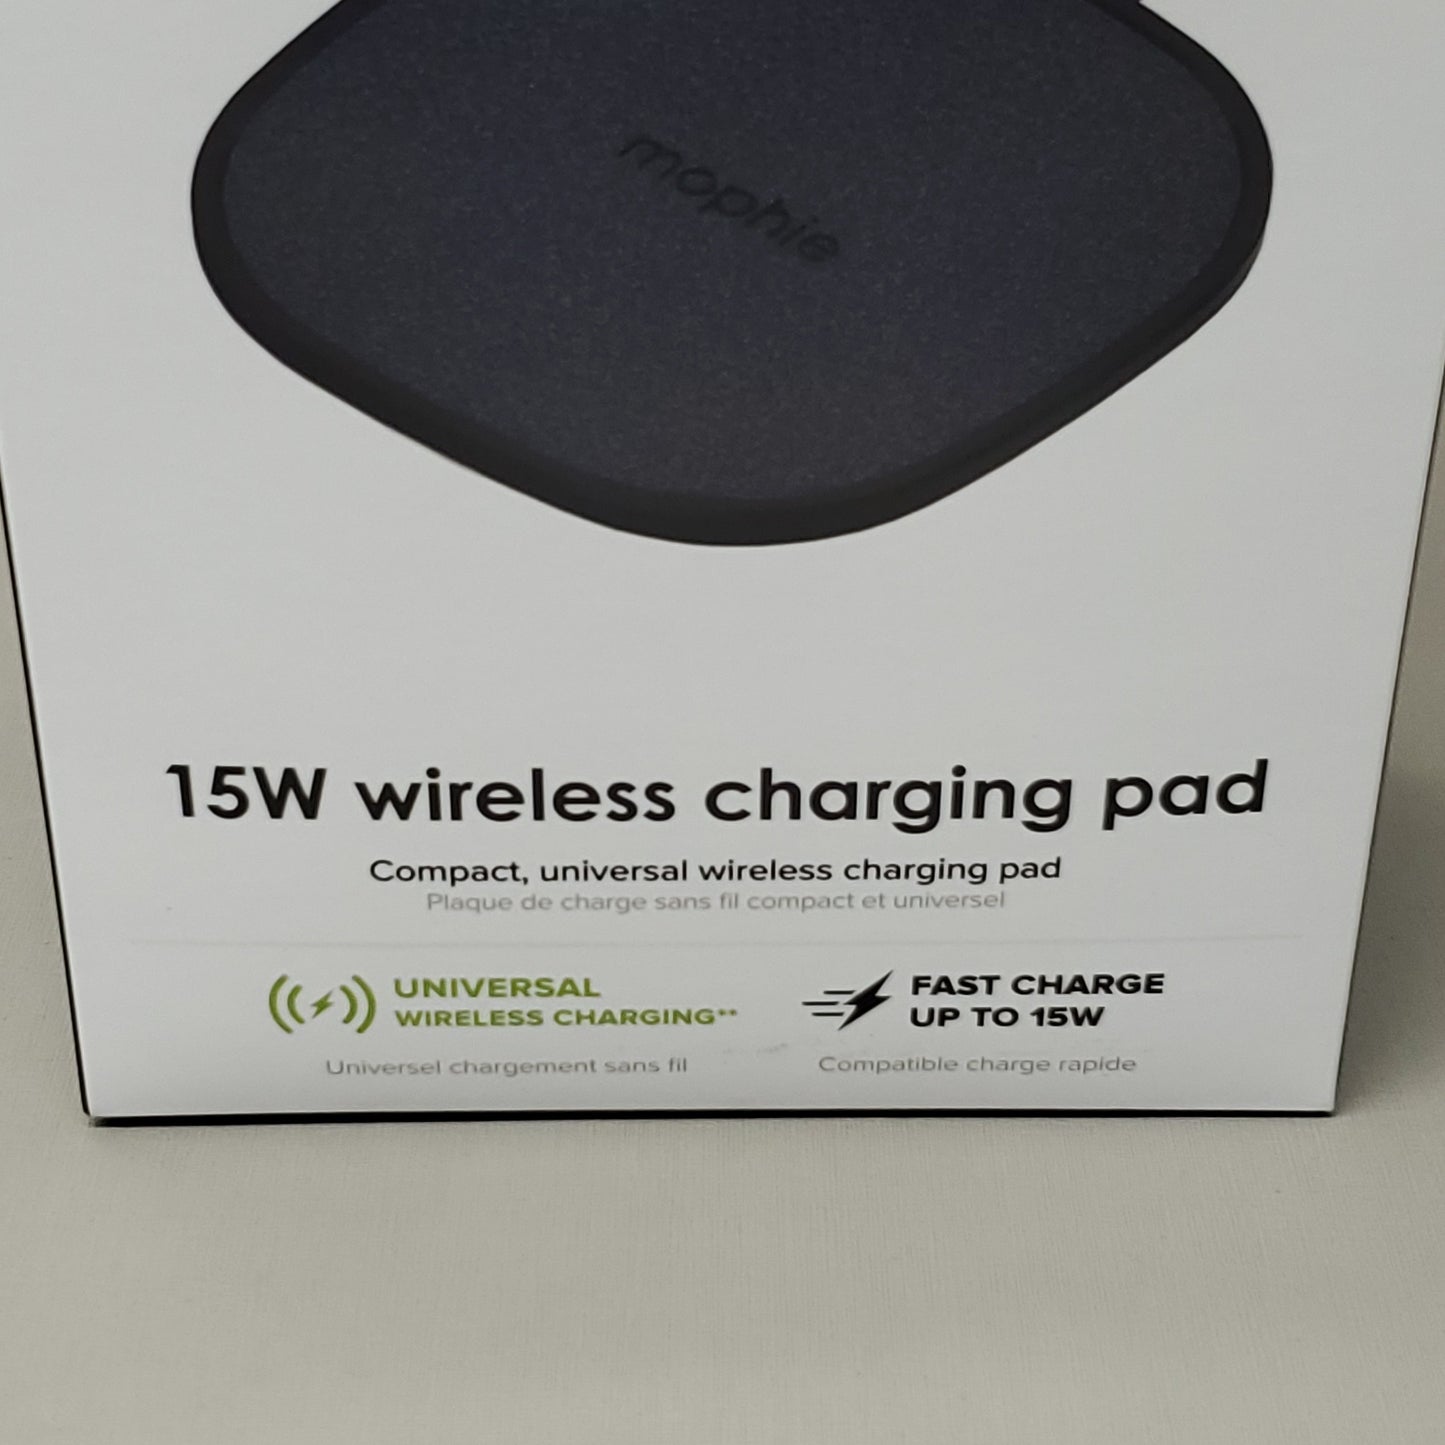 ZA@ MOPHIE 5-PACK! 15W Wireless Charging Pad Advertising Cloudera (New) C